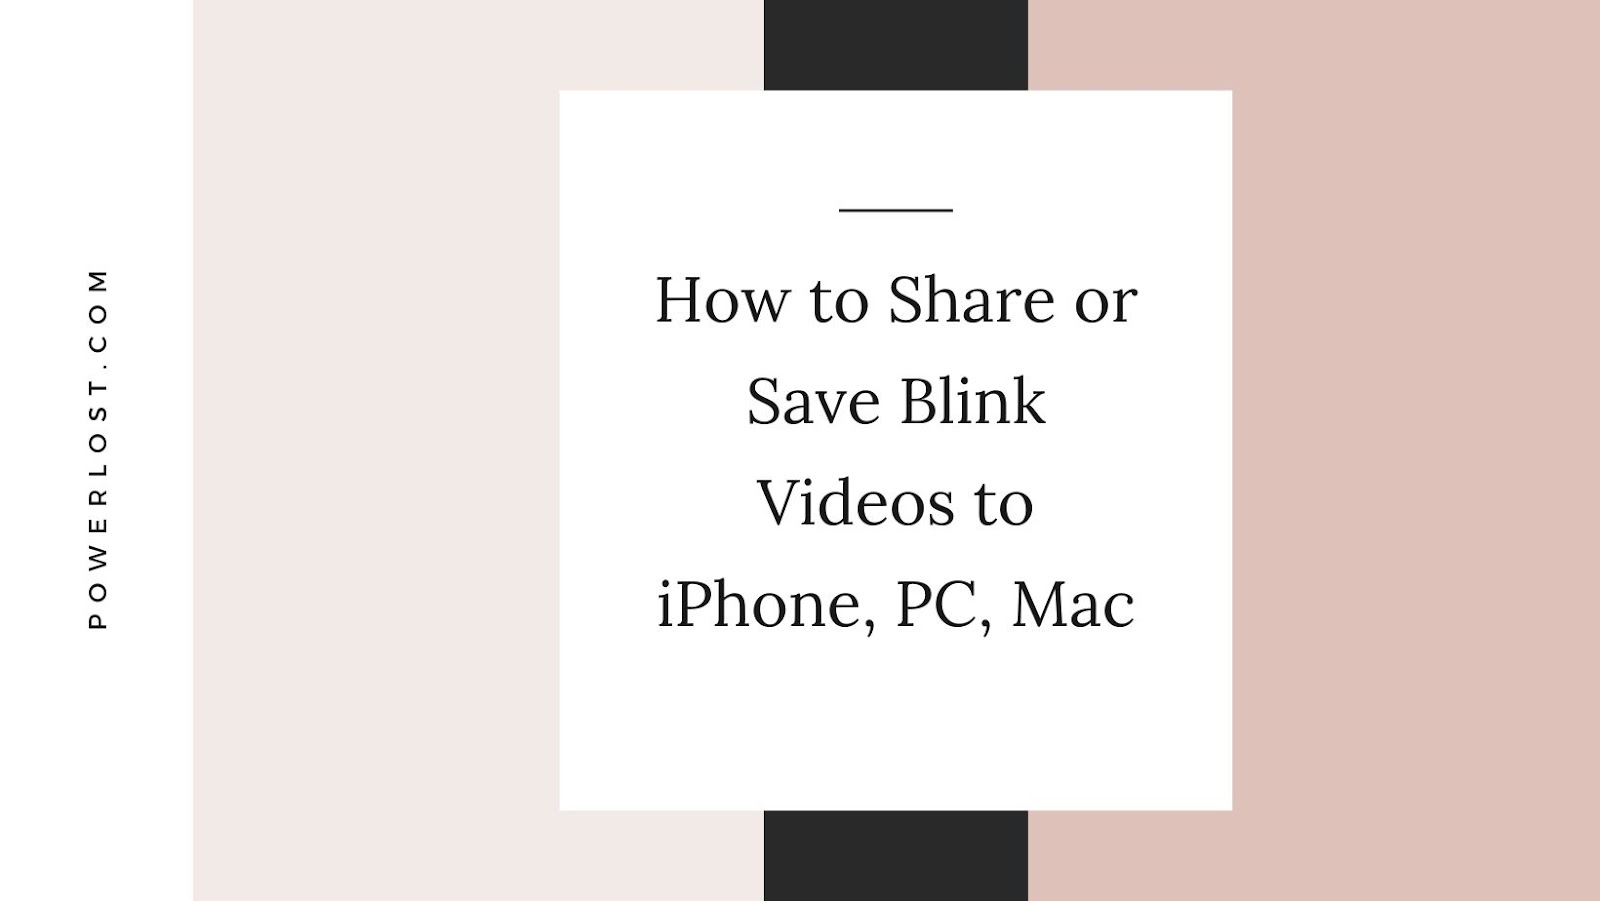 How to Share or Save Blink Videos to iPhone, PC, Mac